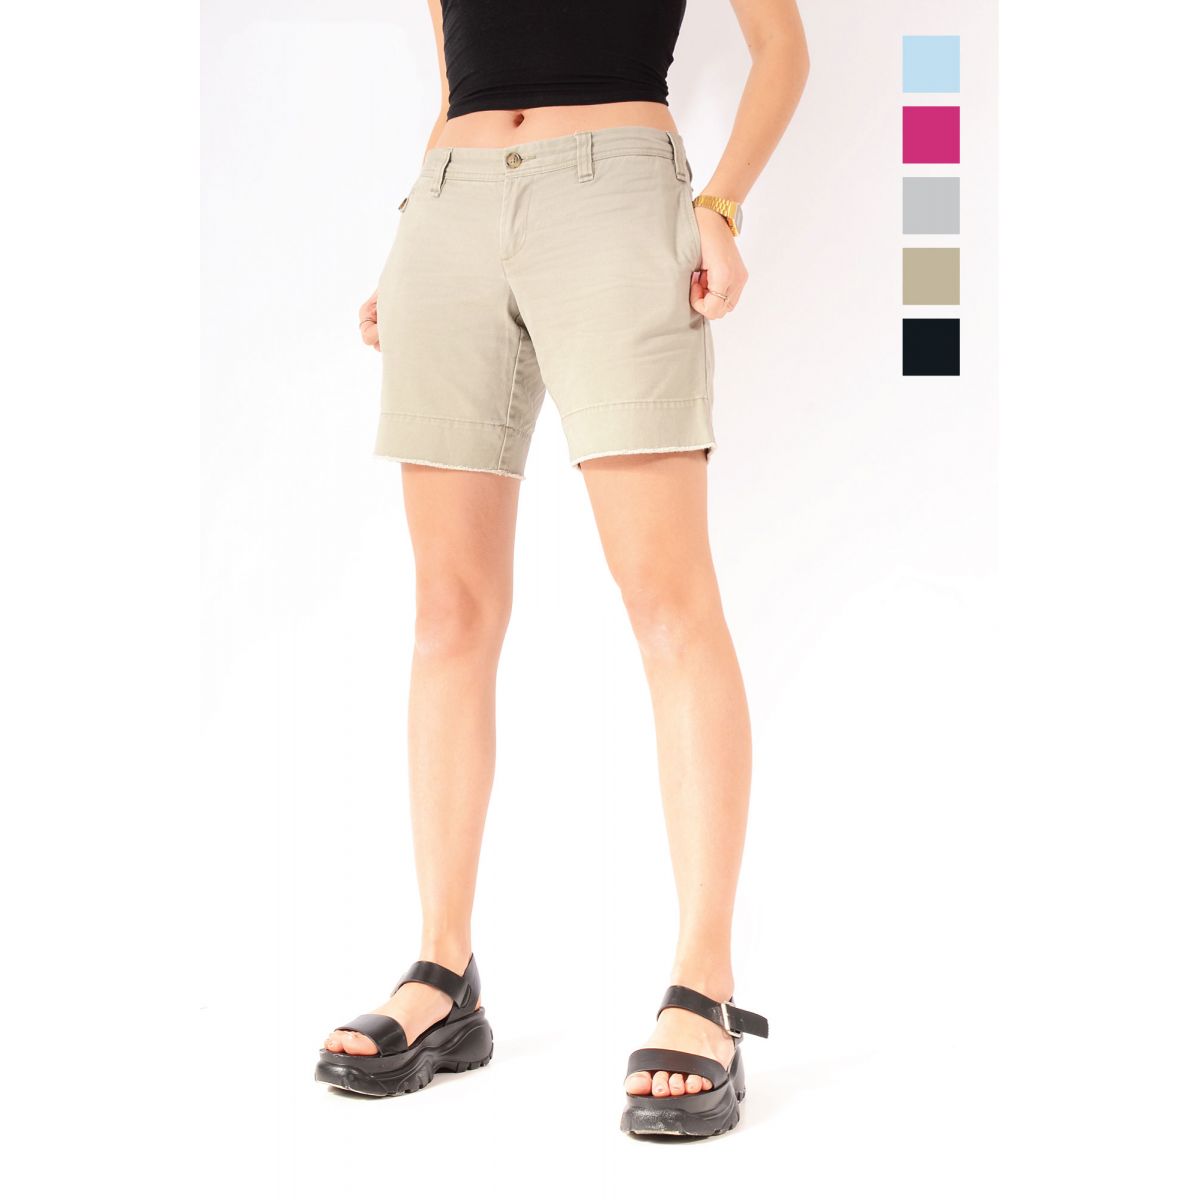 TOMMY HILFIGER Low Waist Boyfriend Fit Chino Shorts Various Colours & Sizes